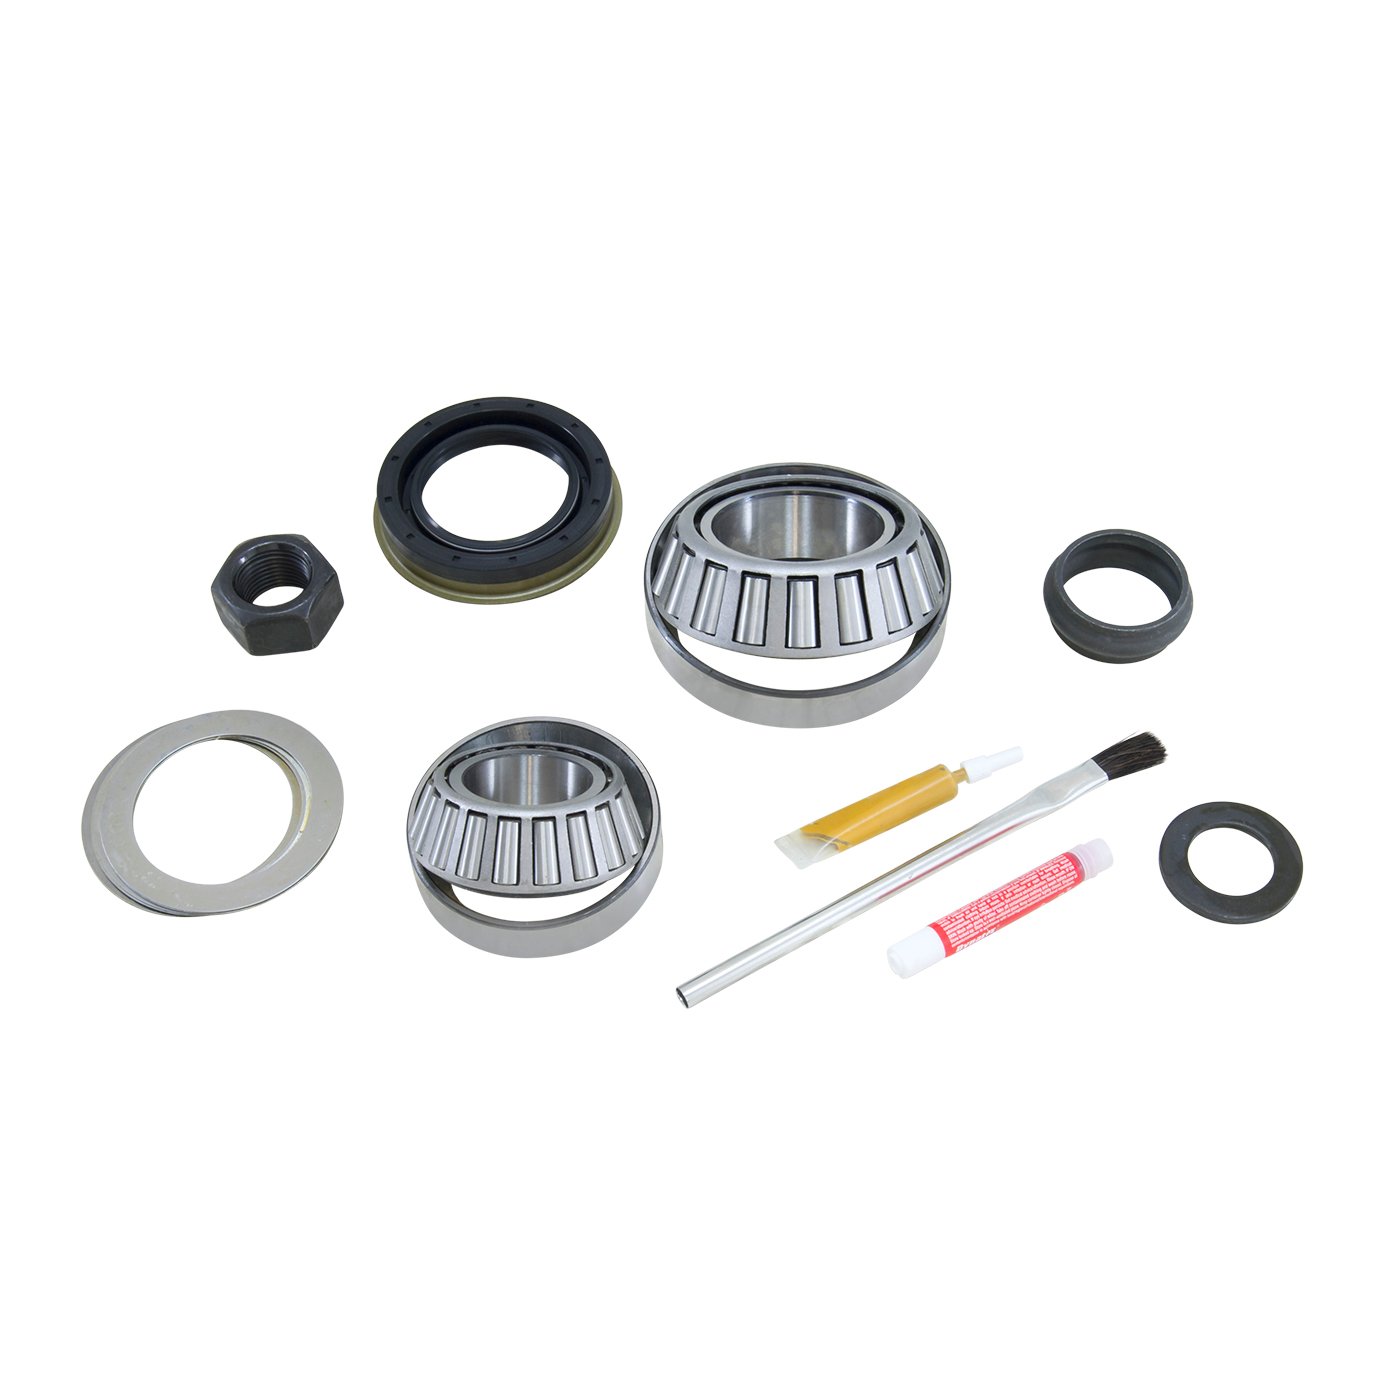 USA Standard ZPKC8.25B Pinion Installation Kit, For '76 And Up Chrysler 8.25